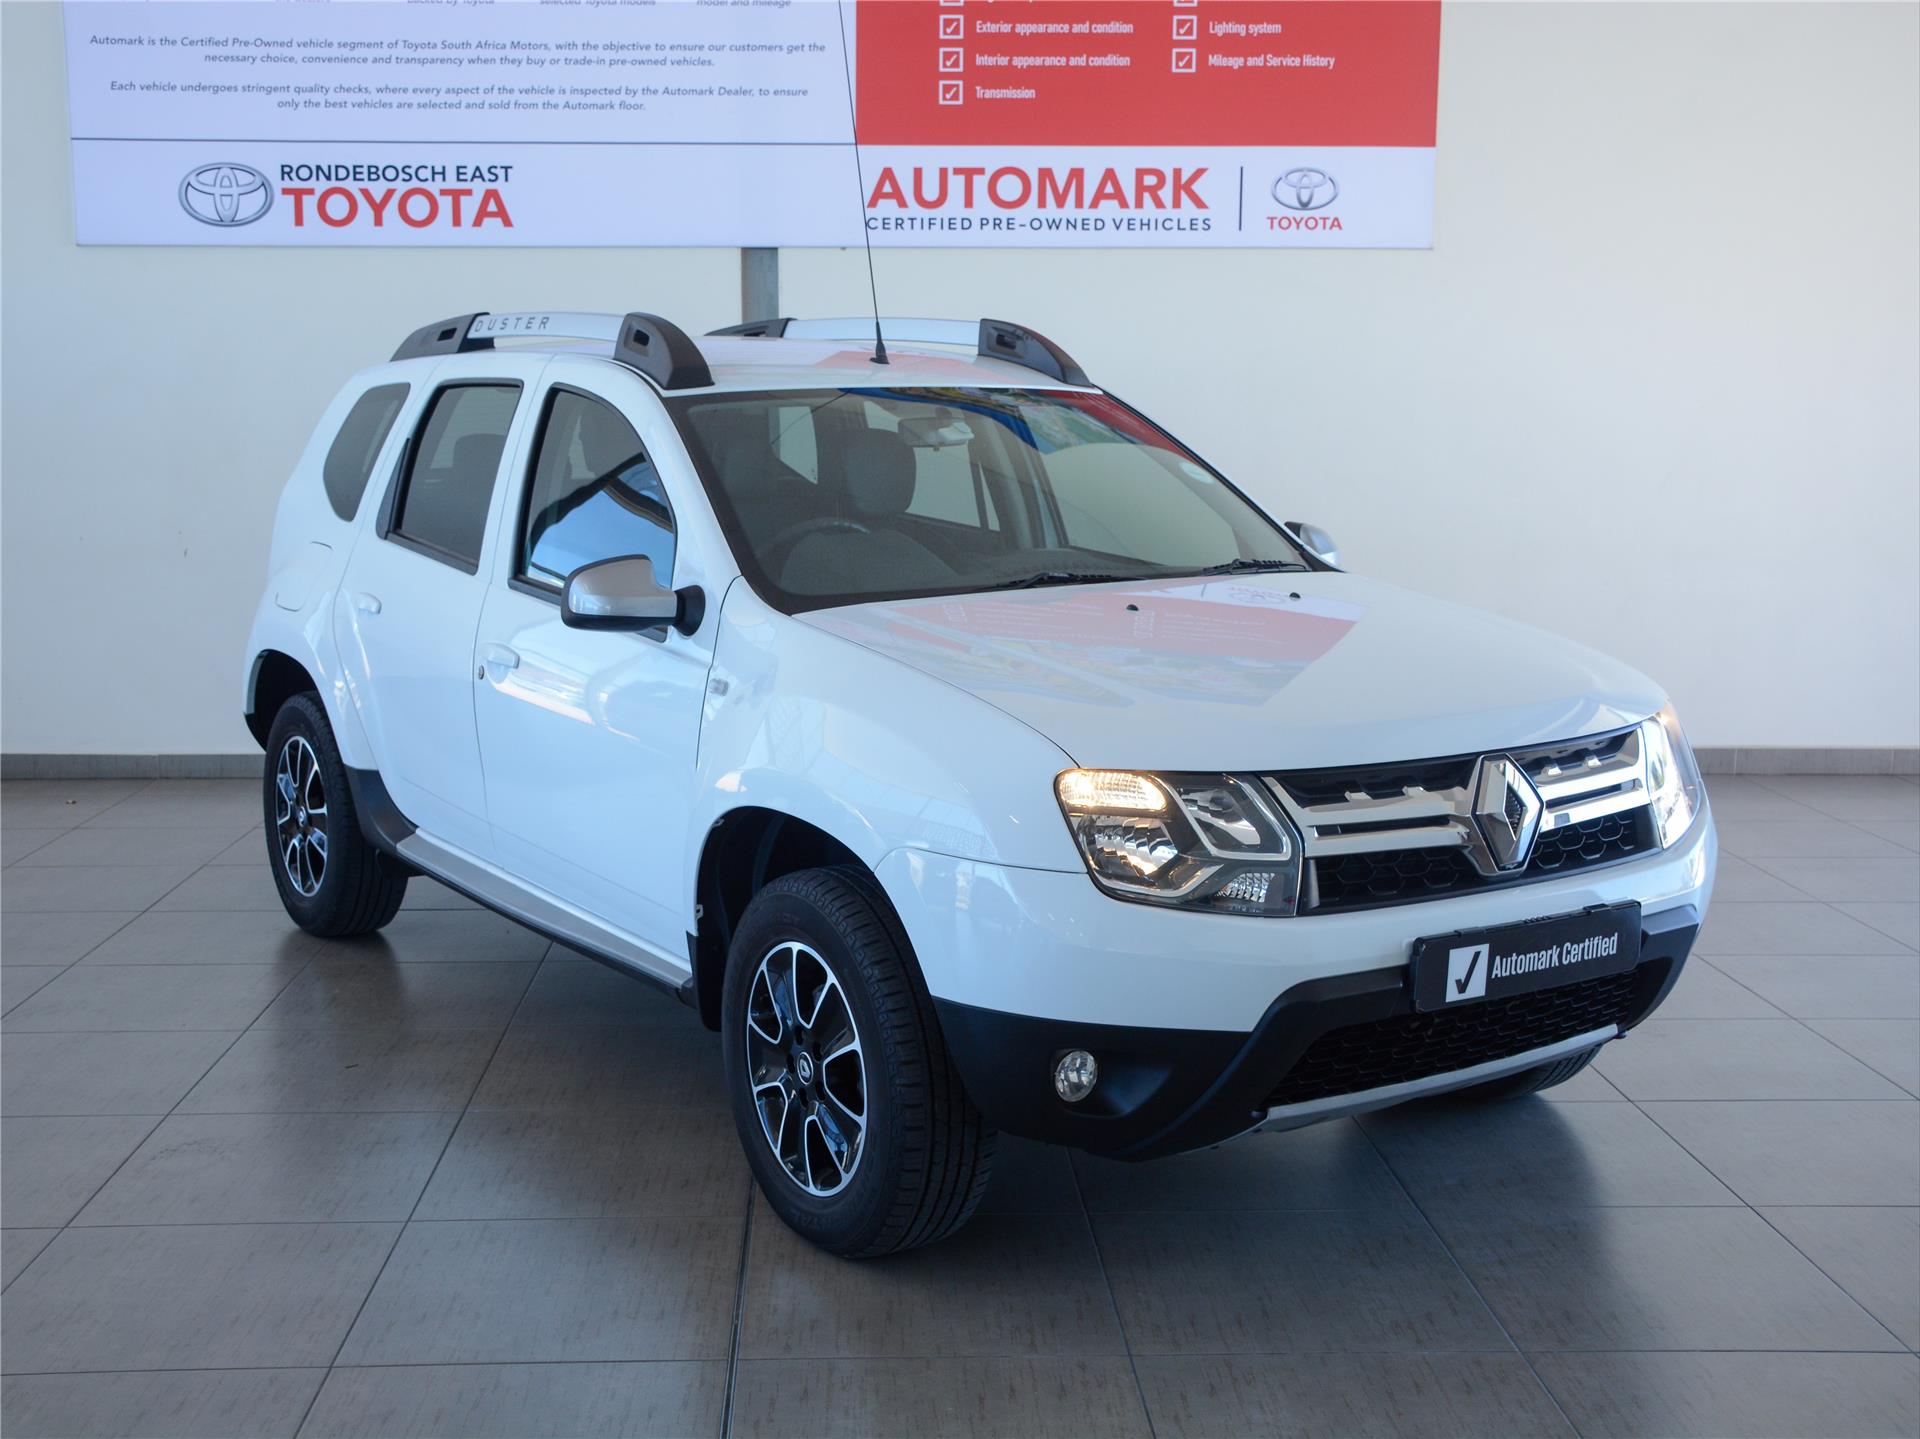 2017 Renault Duster  for sale - 1172532/1